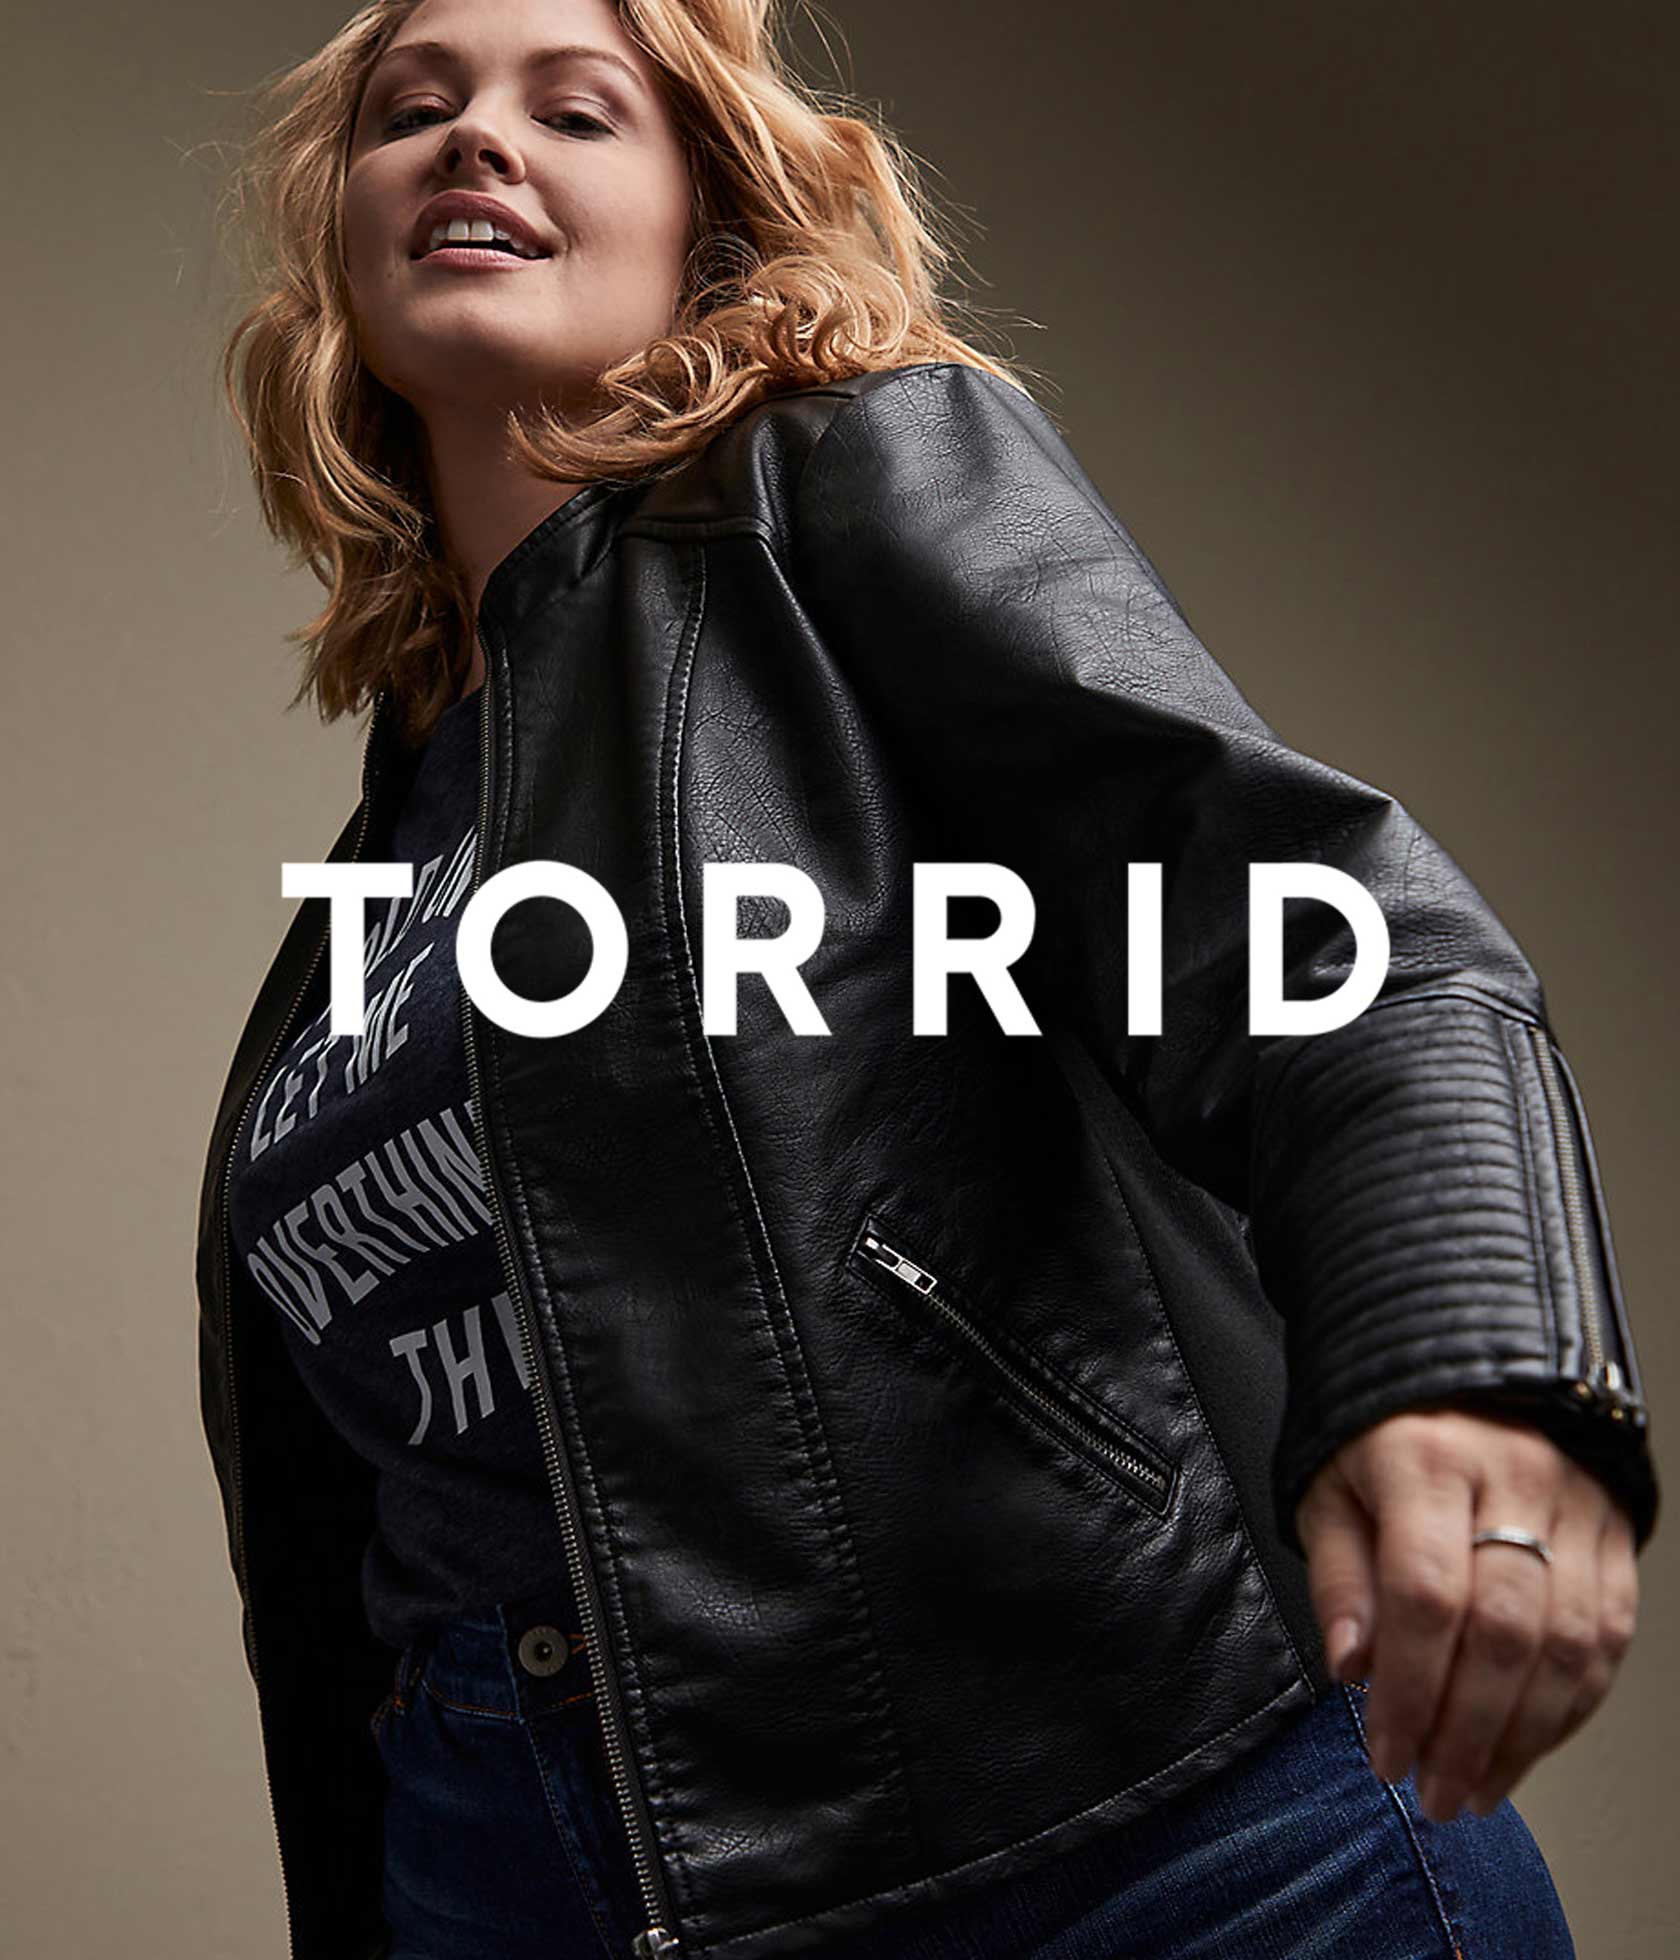 Pay in 4 small payments at Torrid Klarna US